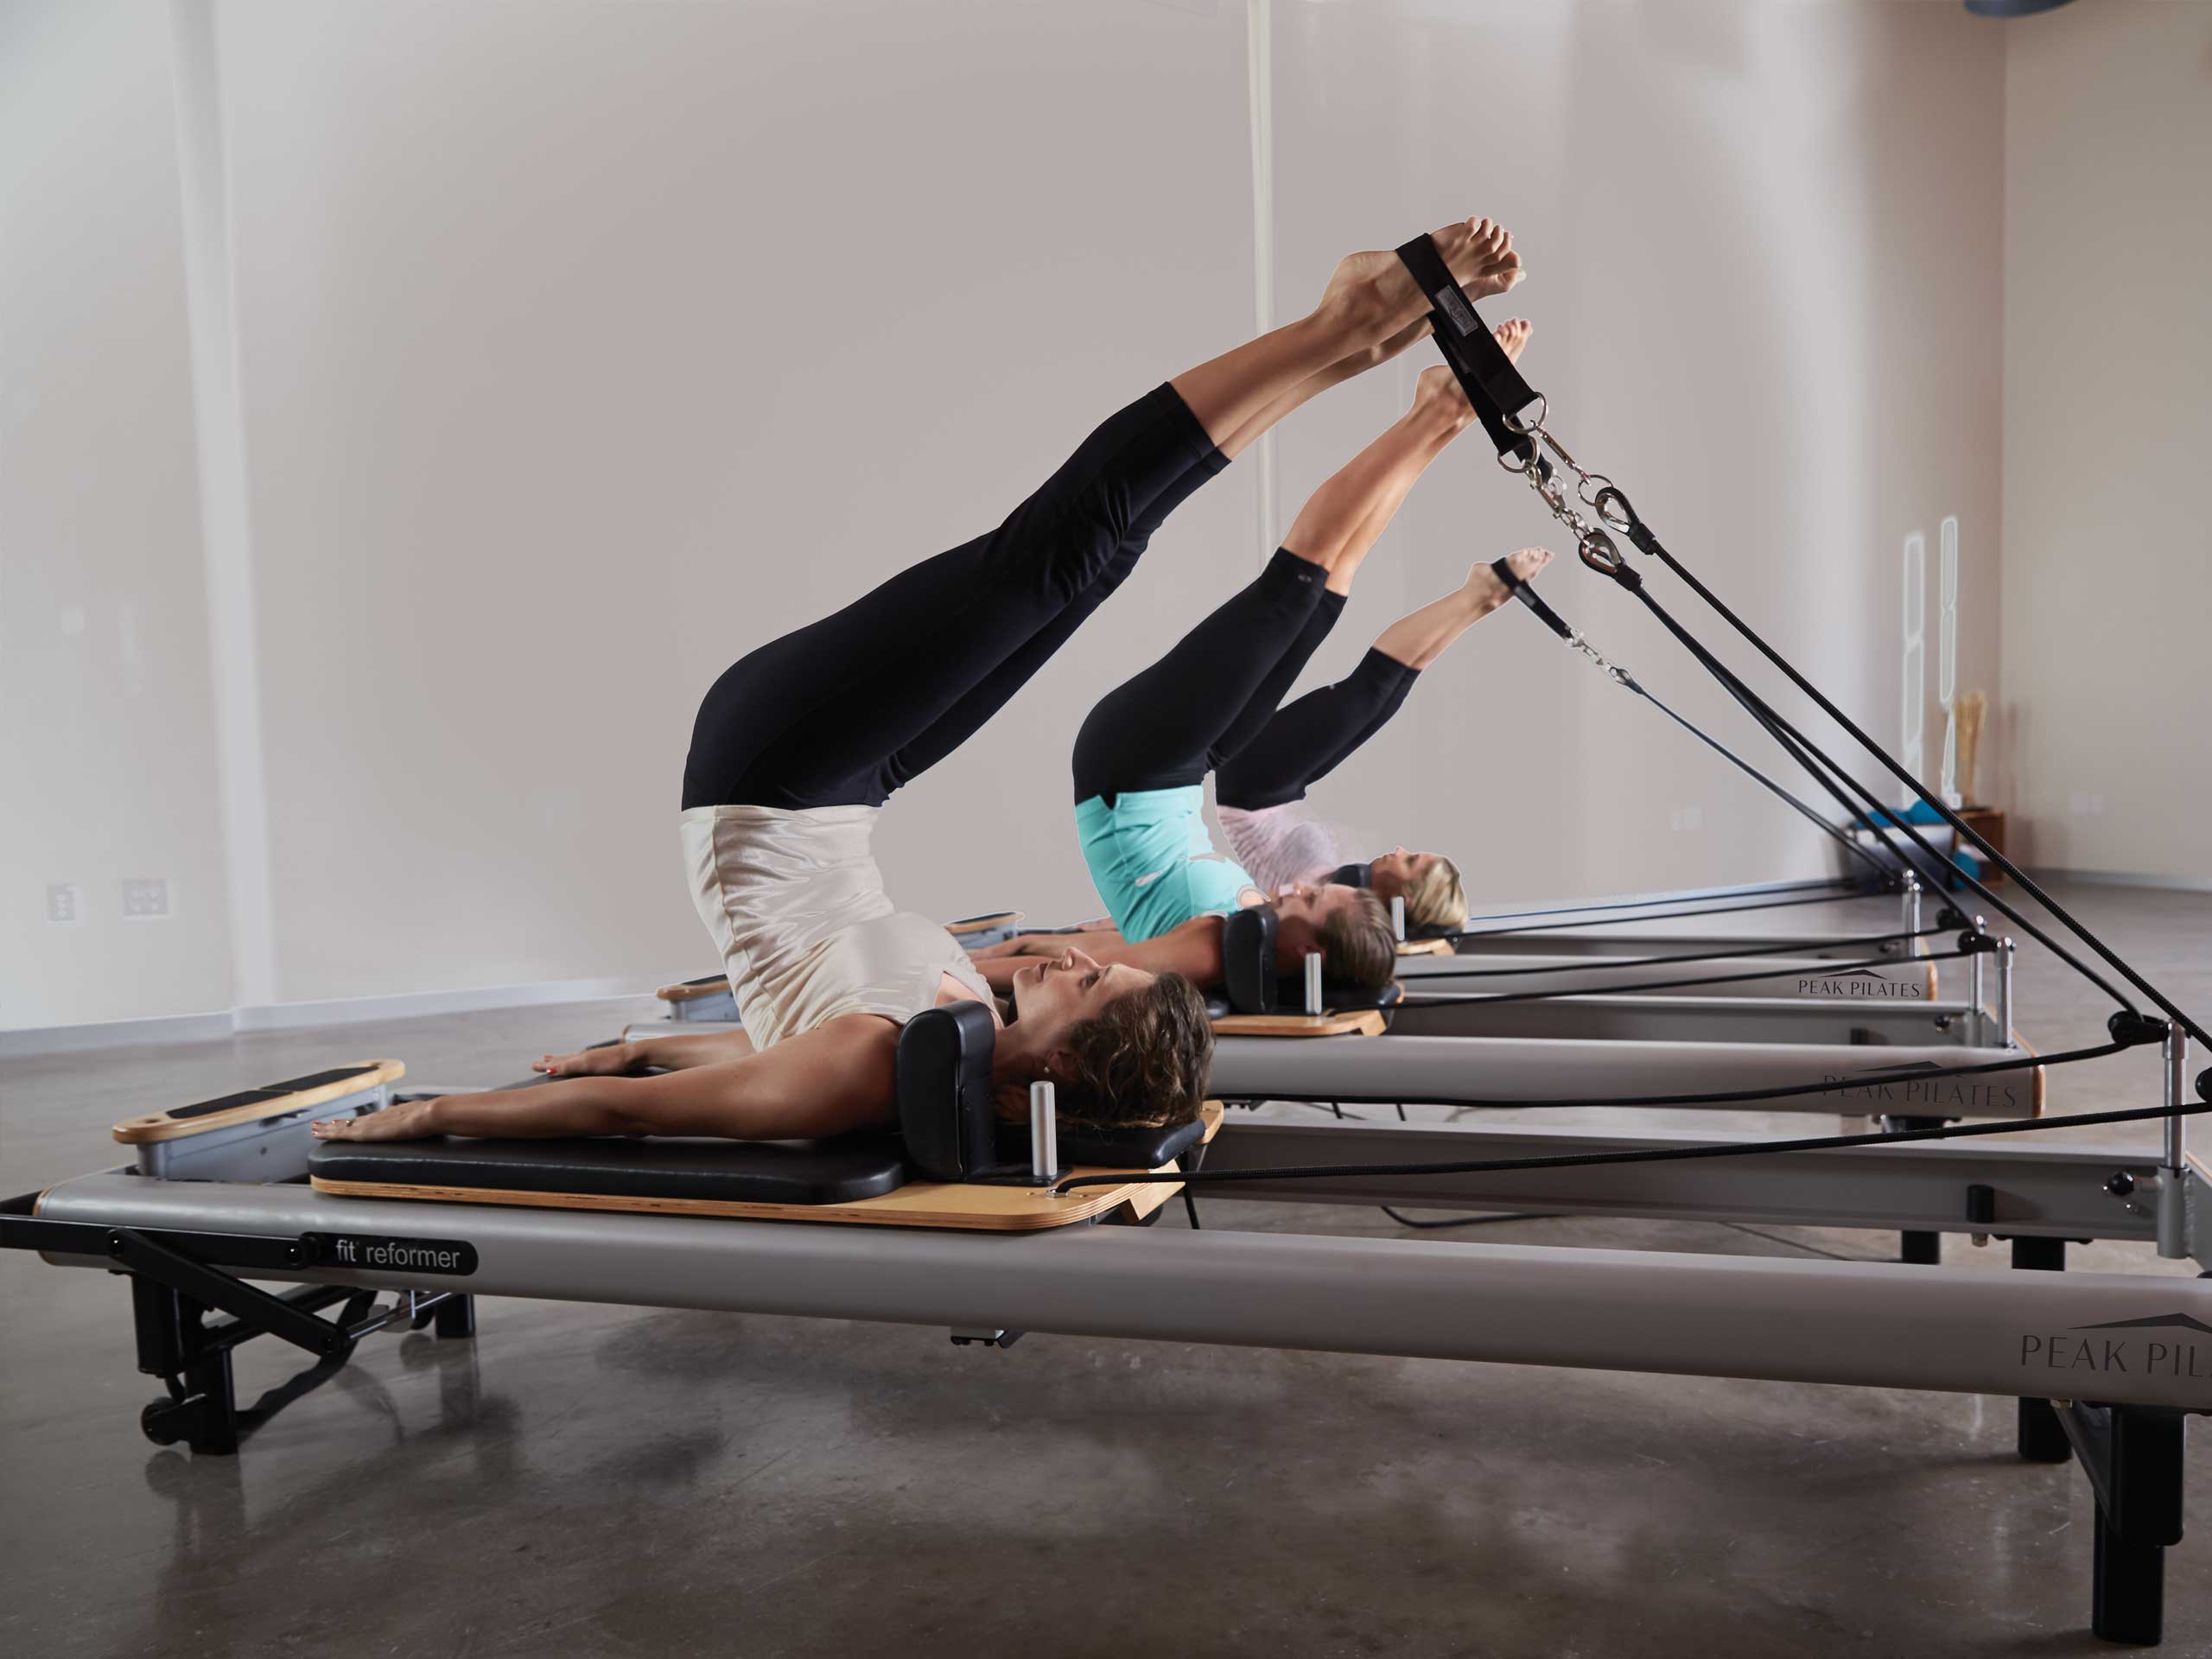 Know all about the Importance of pilates